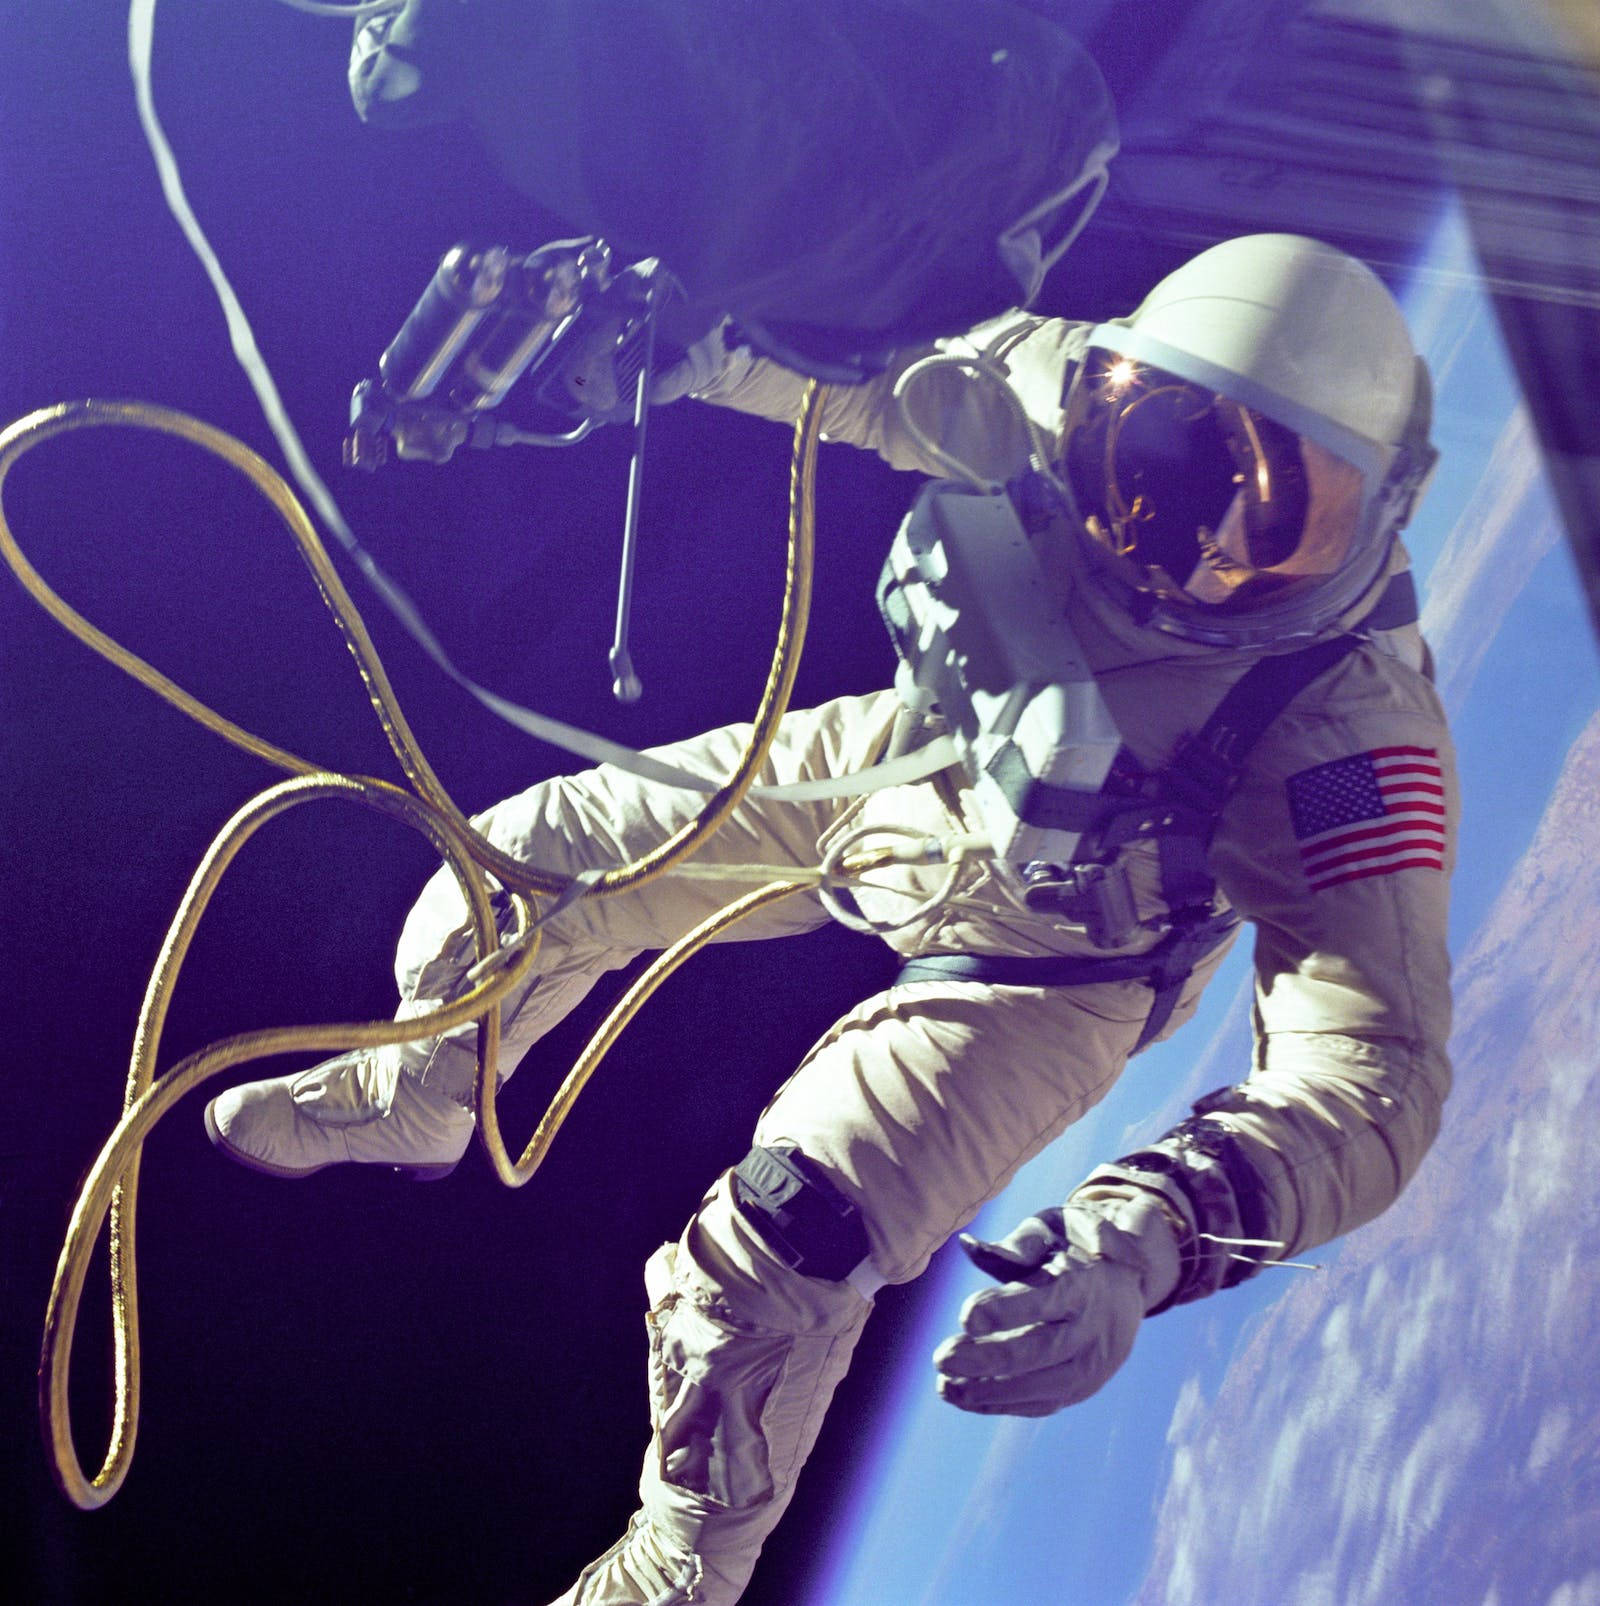 Edward White An Astronaut In Space Background